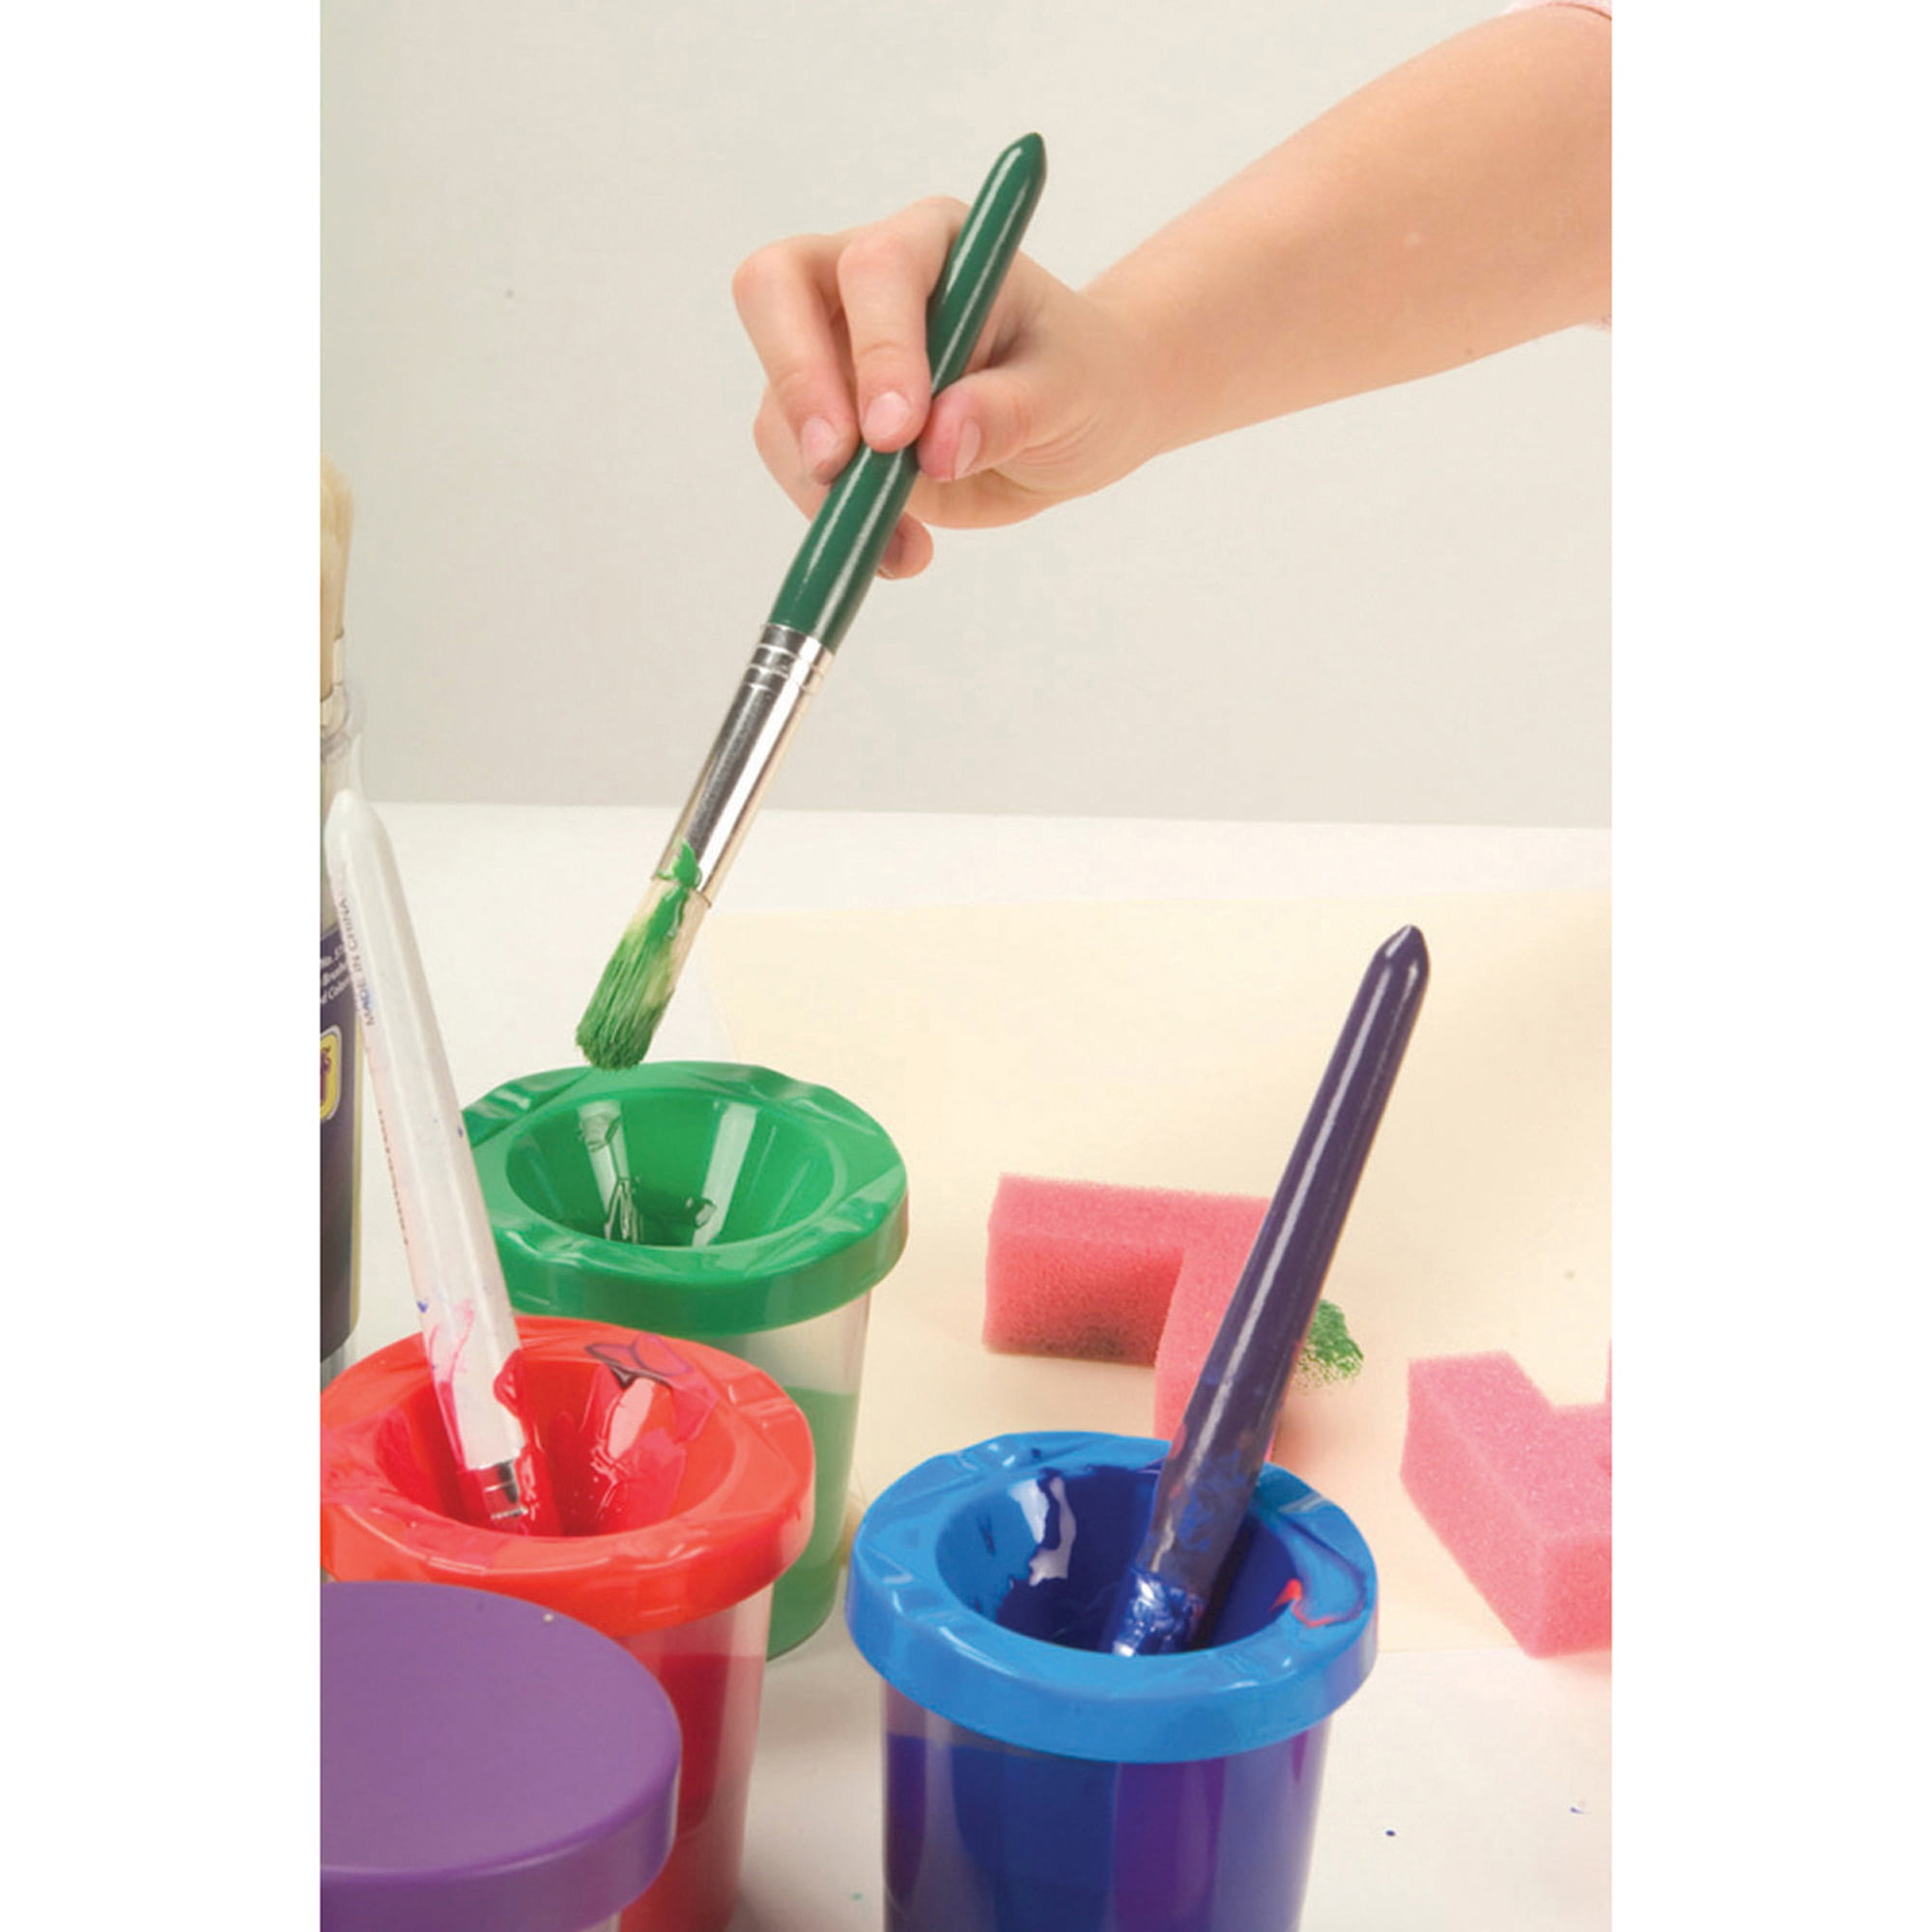 🎨DIY NO MESS PAINT CUPS🎨 Here is the link with details: https